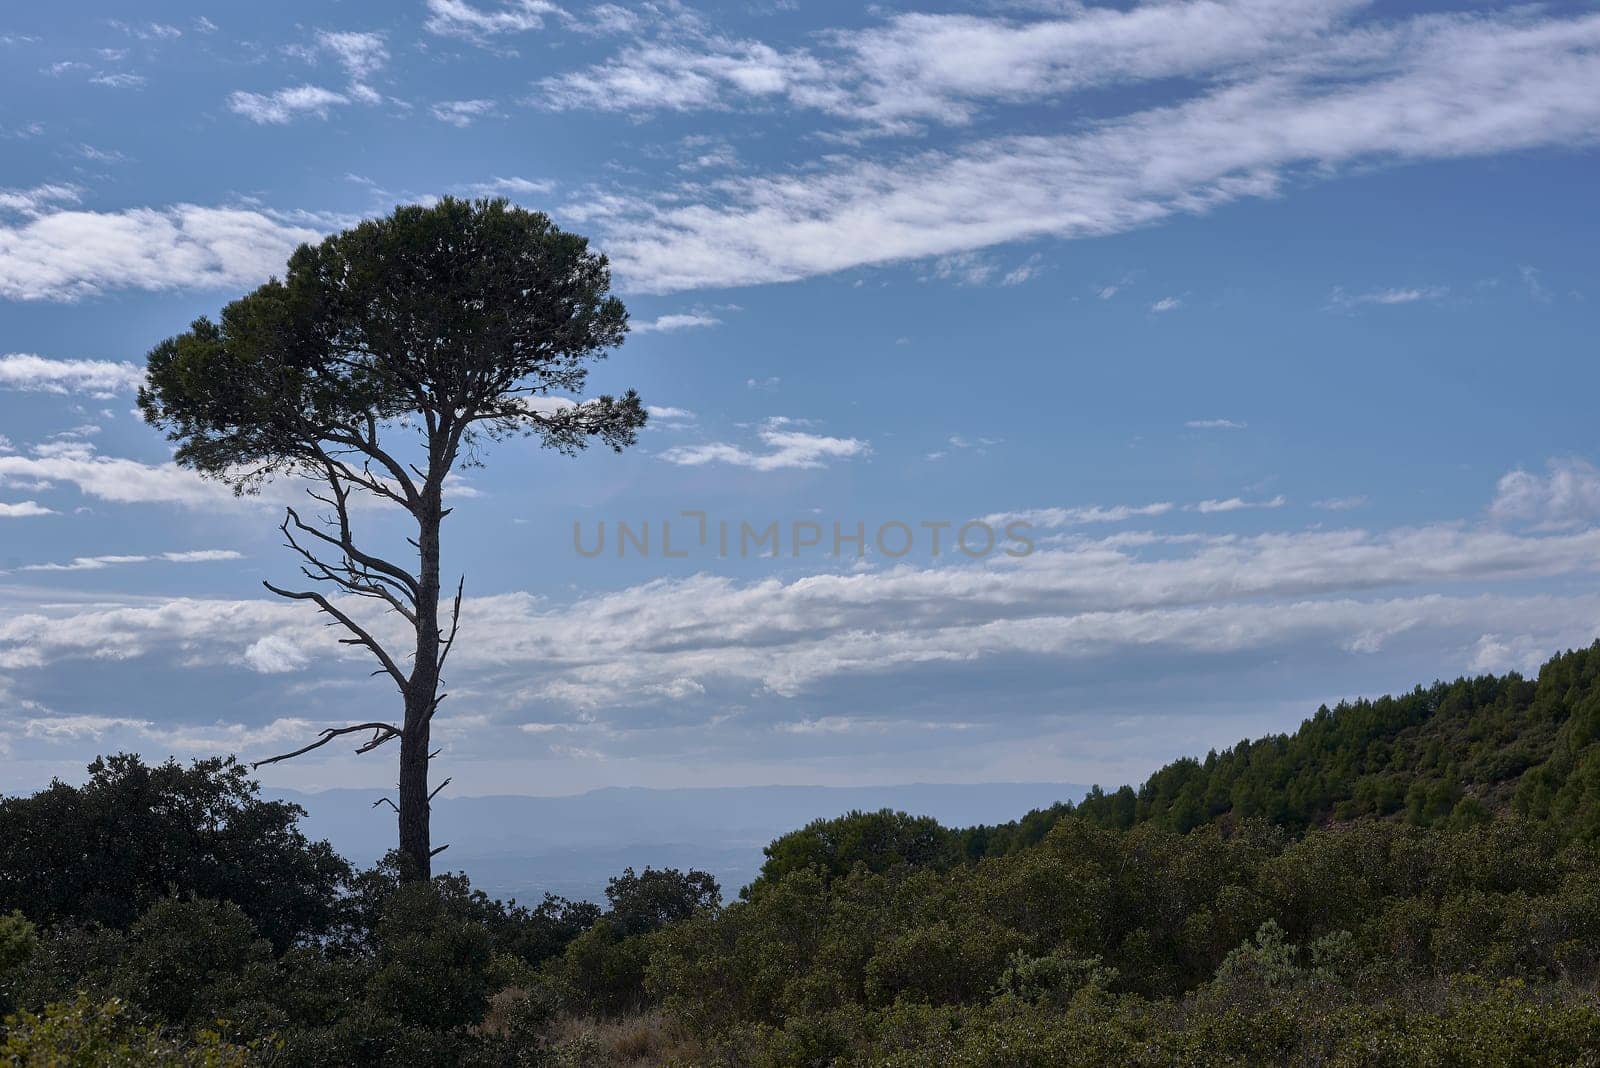 A large pine tree surrounded by low vegetation by raul_ruiz